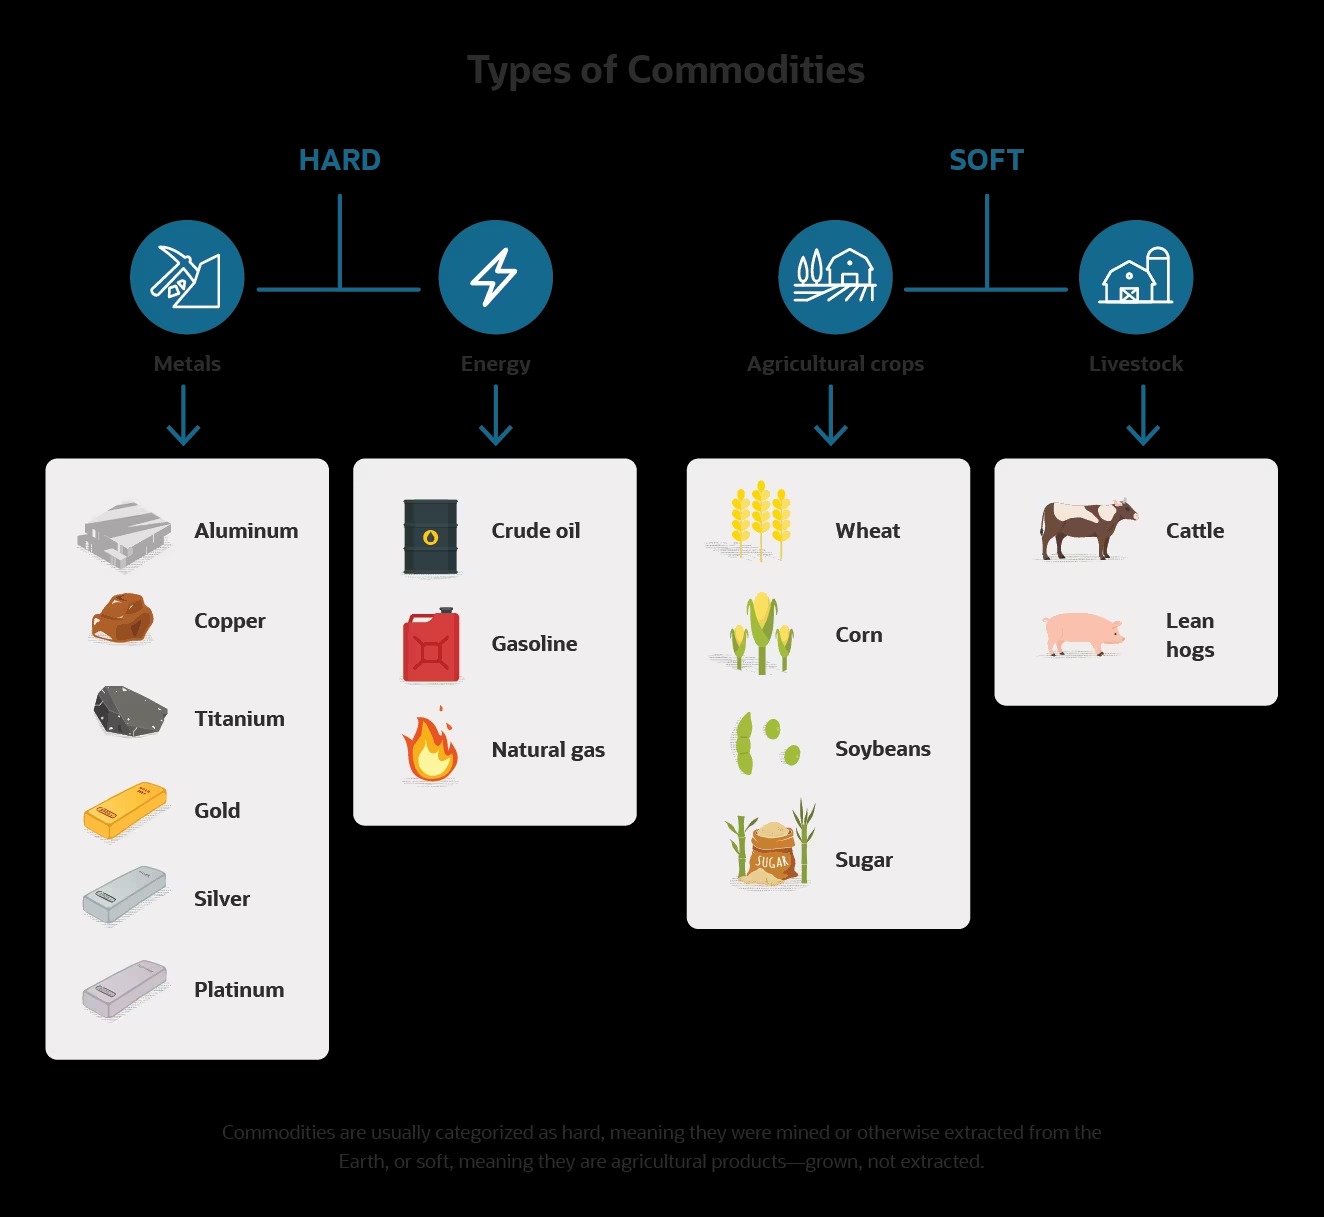 What Are Hard Commodities